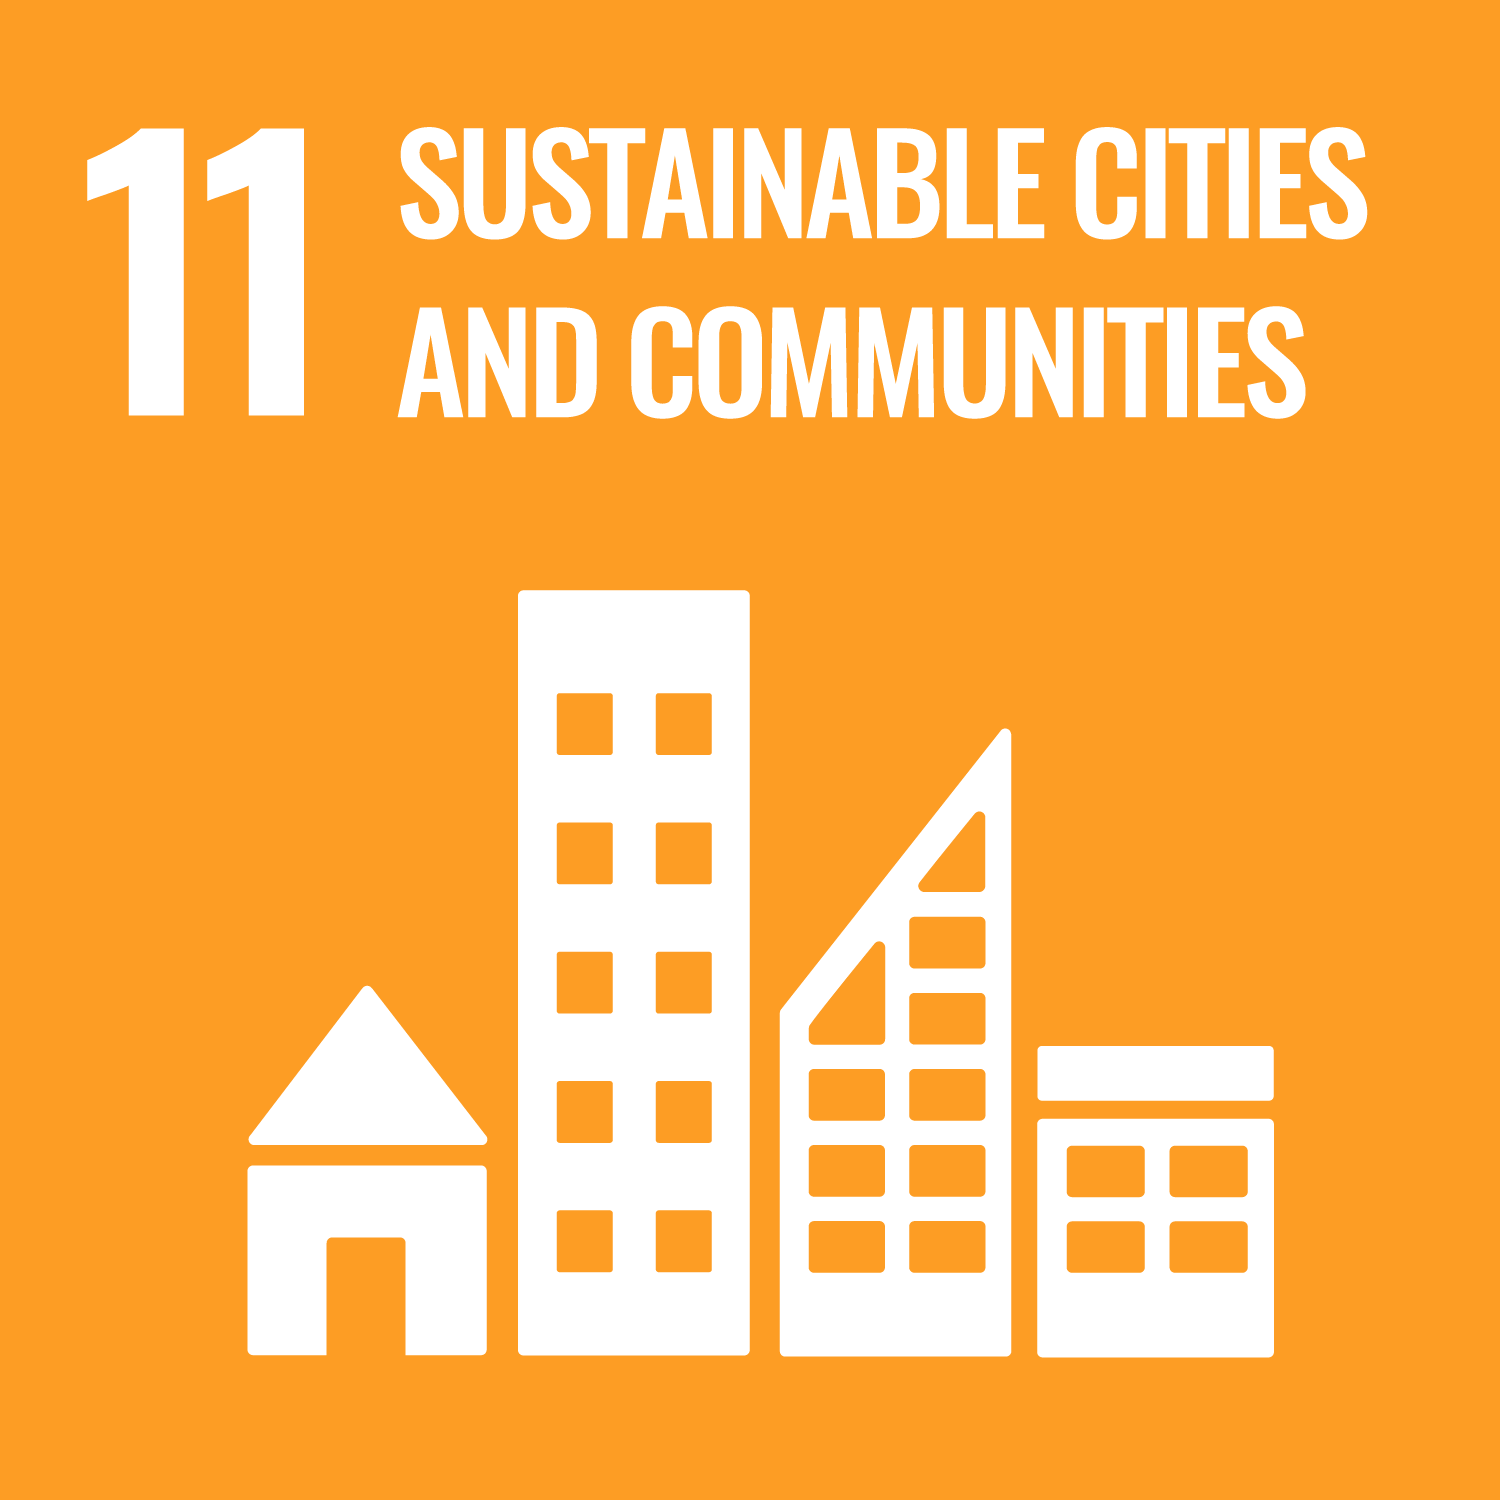 SDG11 - SUSTAINABLE CITIES AND COMMUNITIES